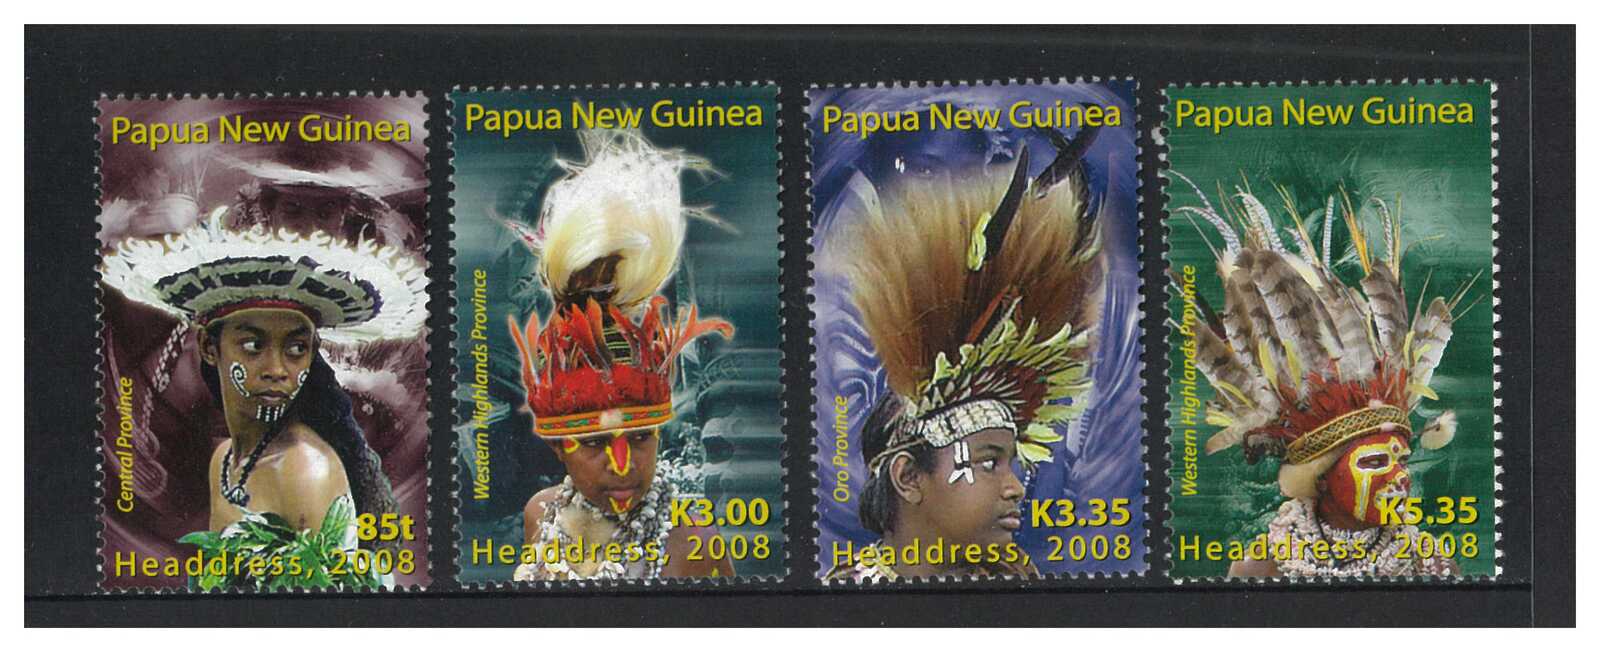 Papua New Guinea 2008 Traditional Headdress Set of 4 Stamps MUH SG1255/58